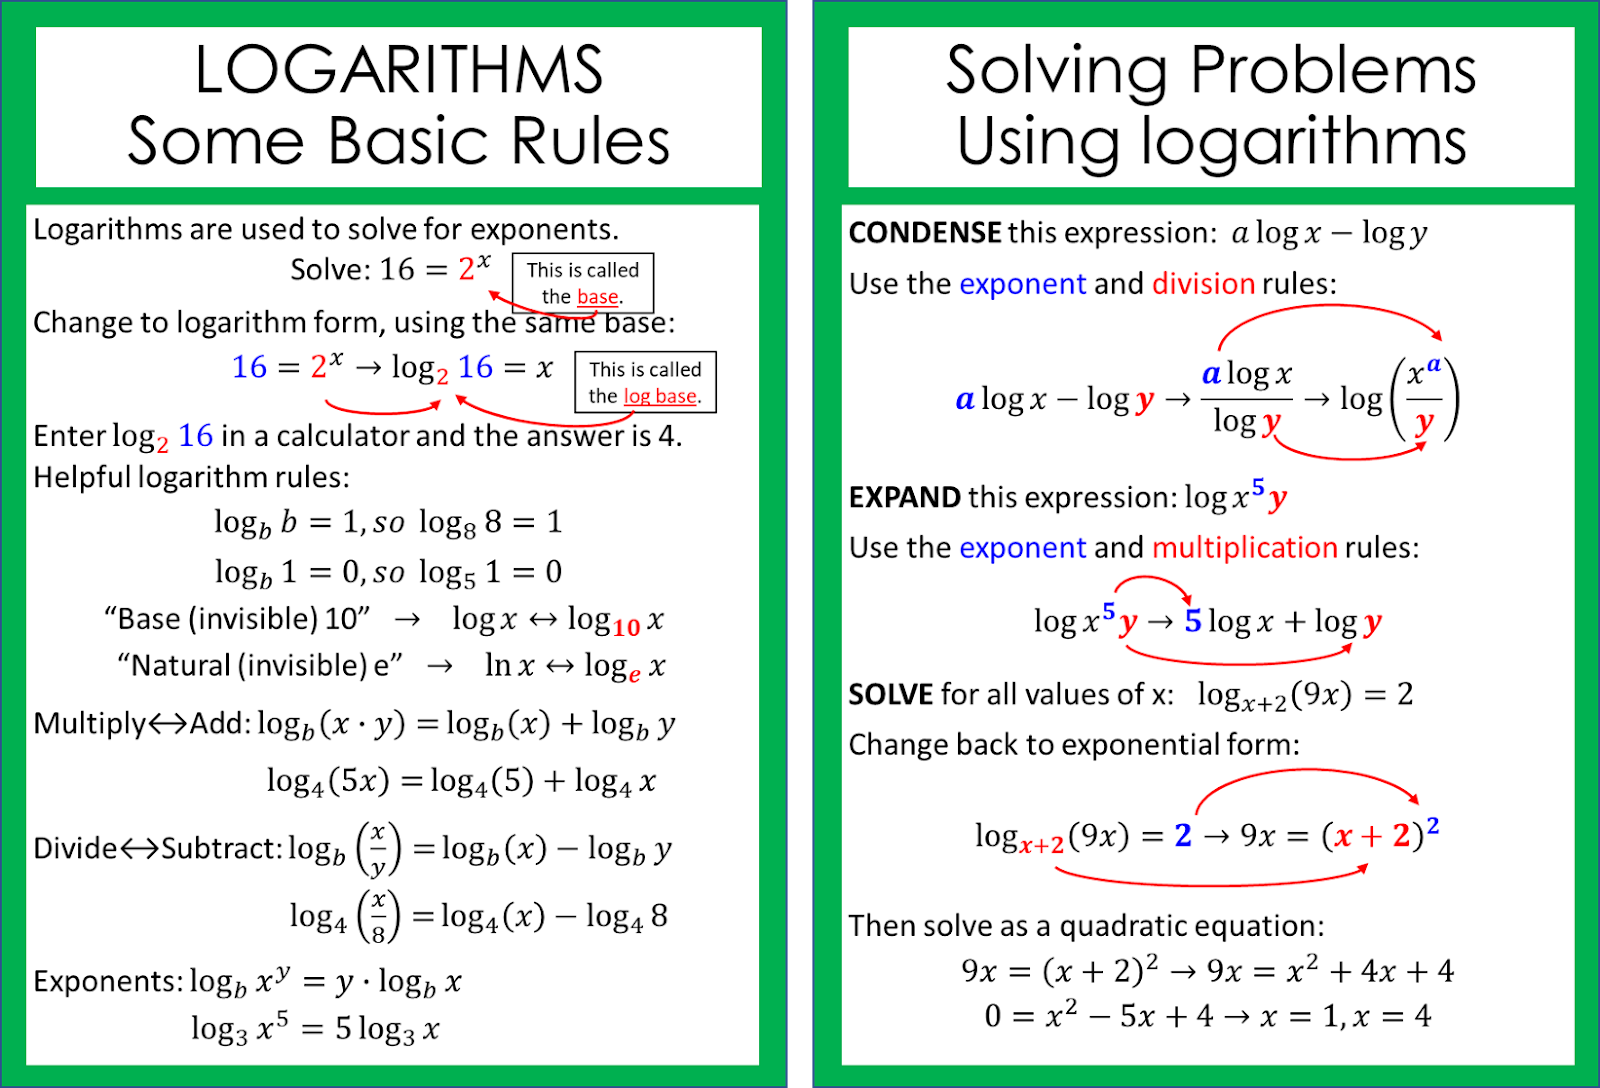 how to solve difficult logarithmic equations